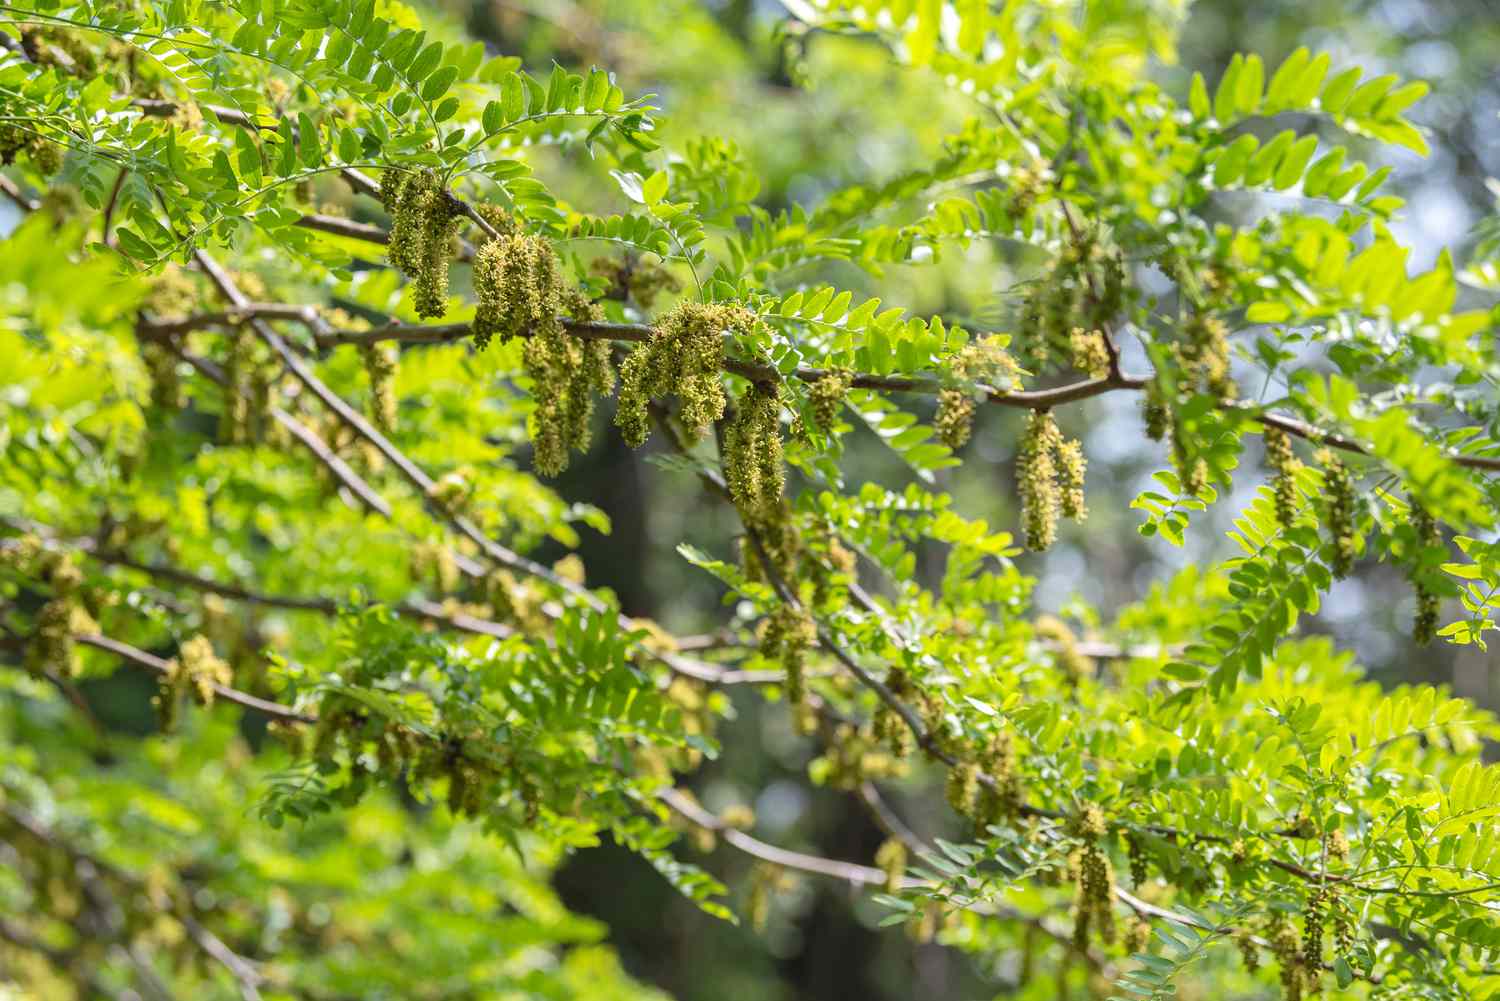 Sunburst honey locust tree branches with bright green fern-like leaves and yellow-green panicles hanging 